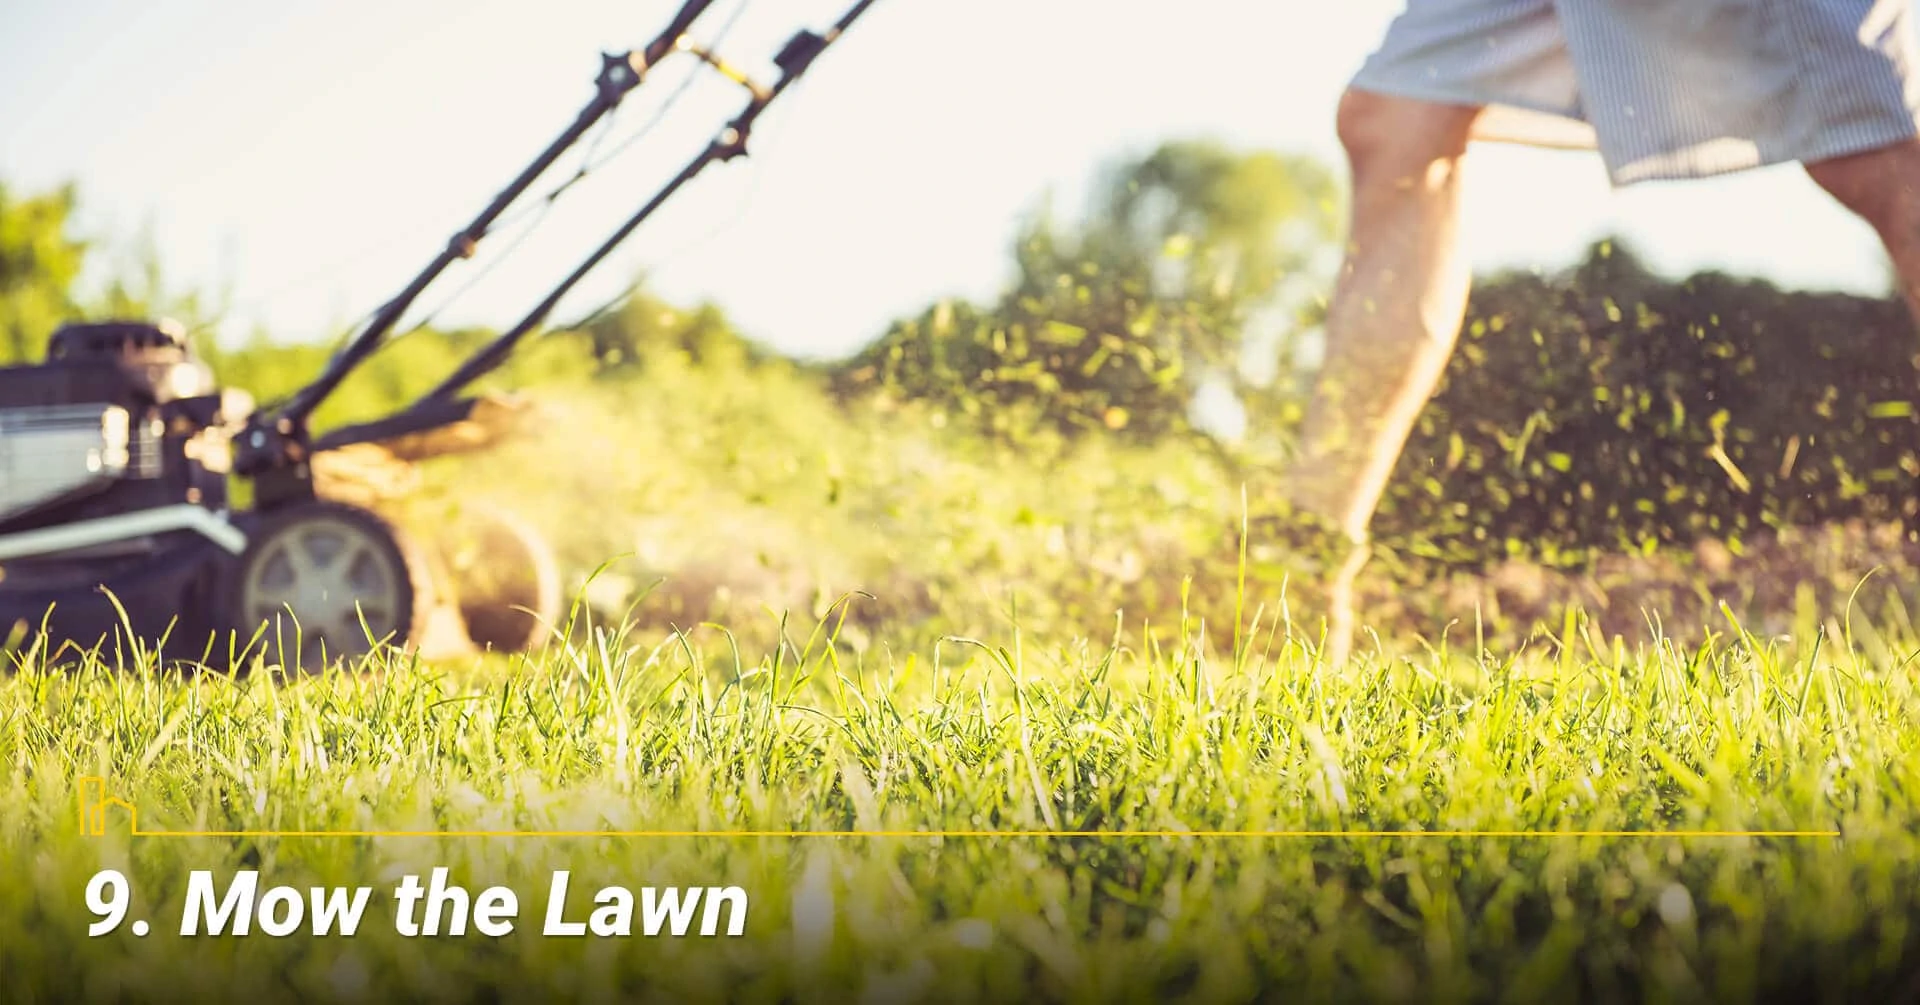 Mow the Lawn, keep your lawn in top shape